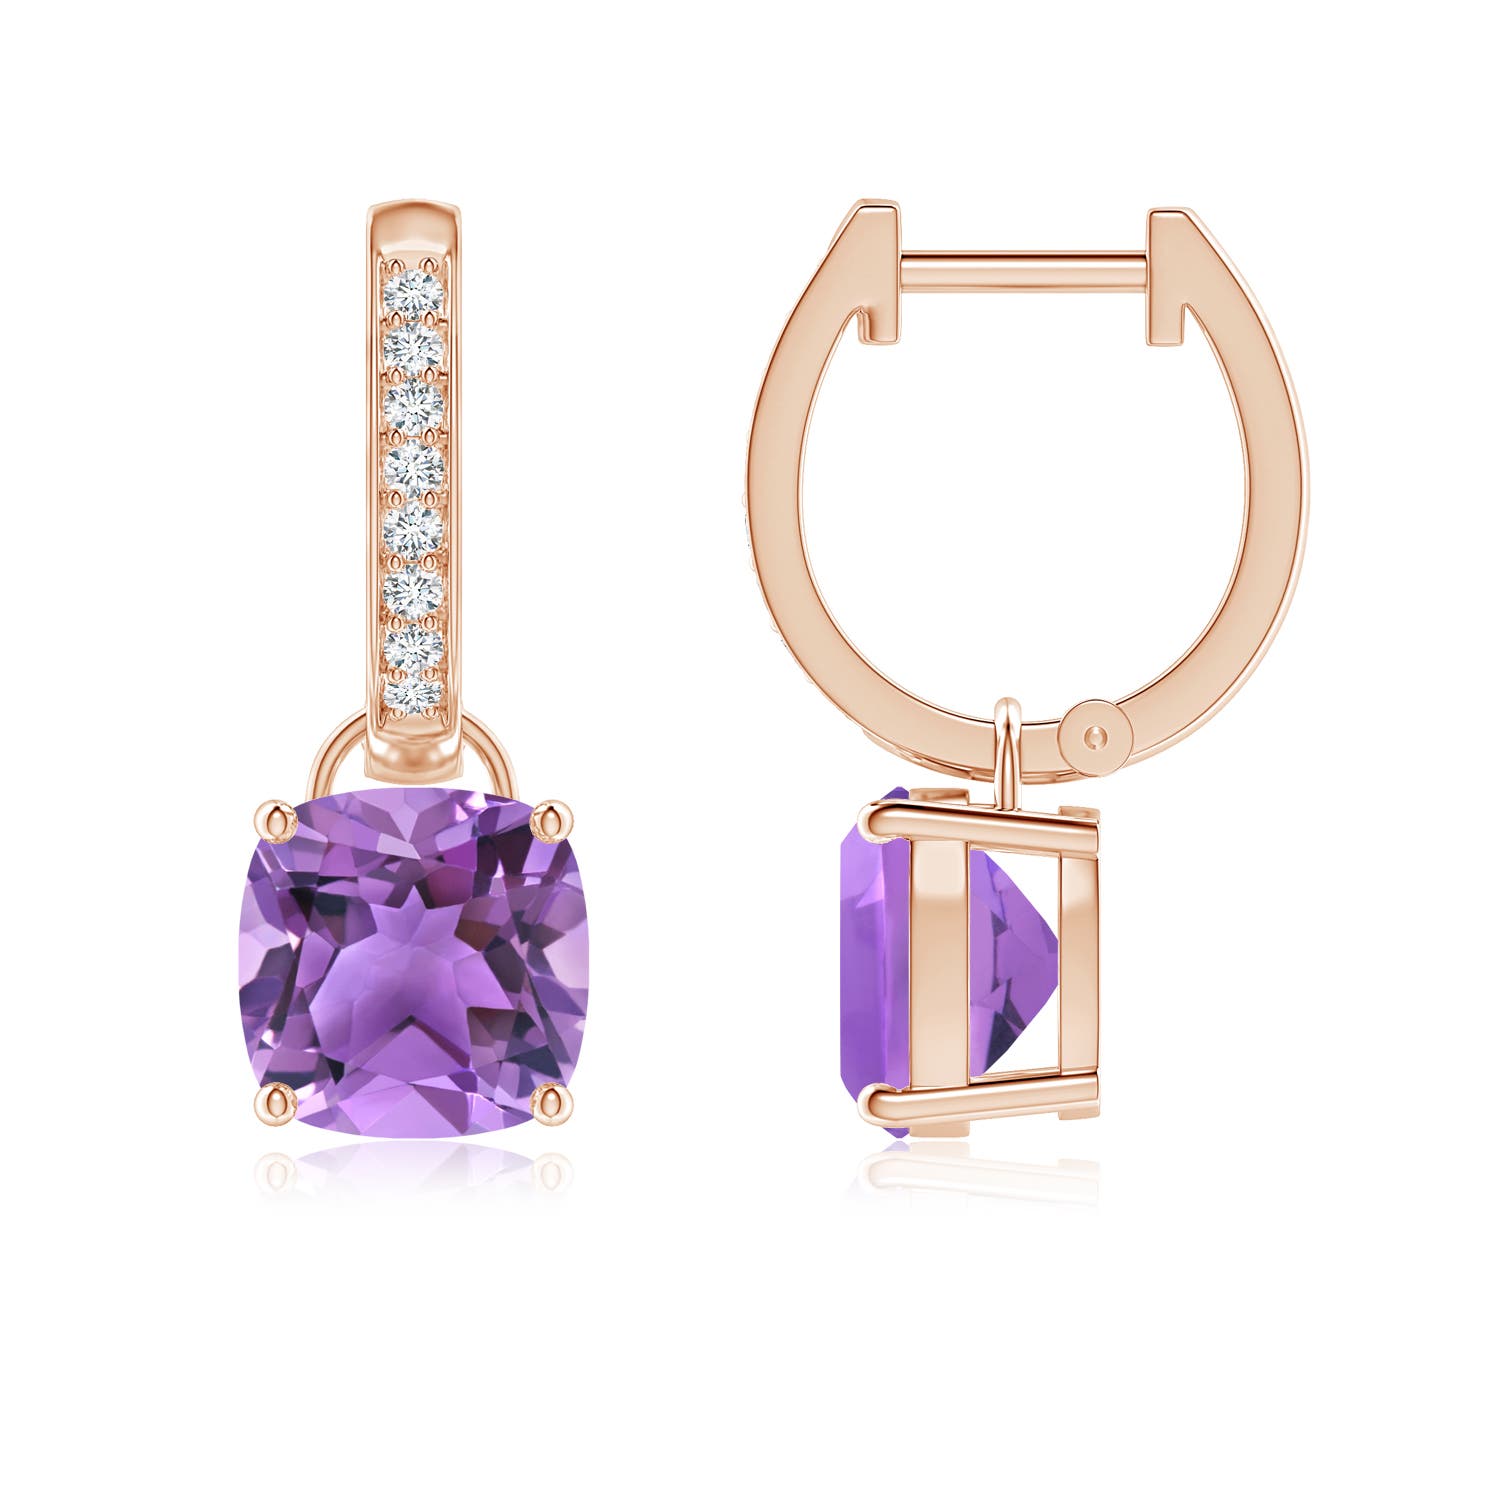 AA - Amethyst / 2.83 CT / 14 KT Rose Gold